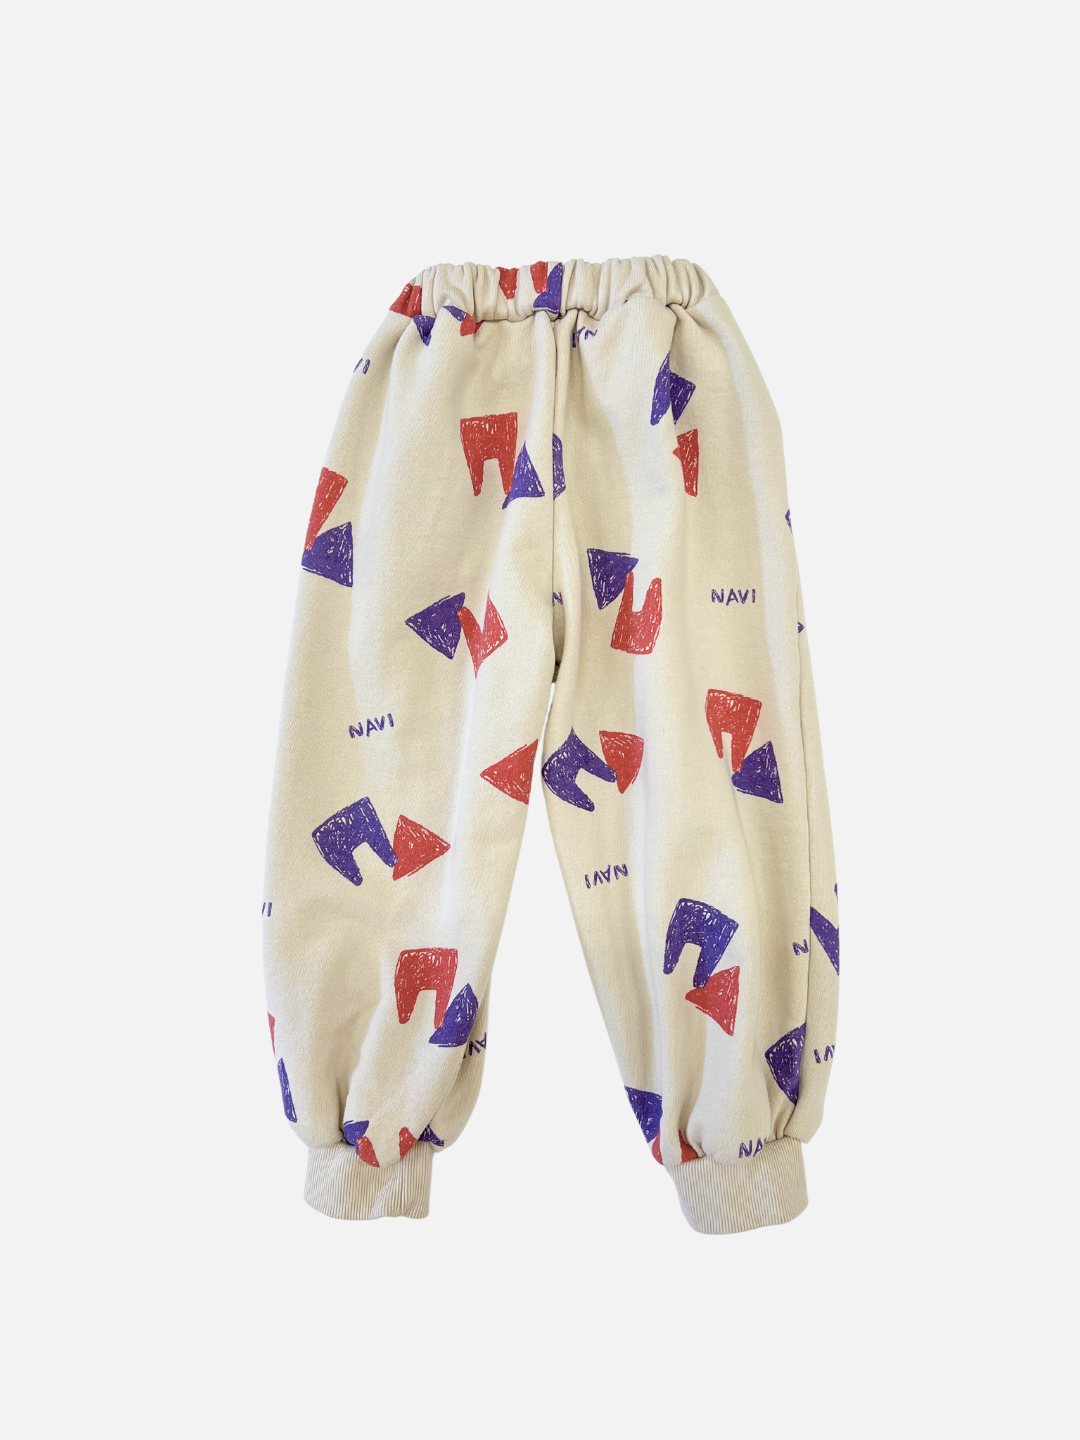 Oatmeal | Back view of kids beige sweatpants with an all over pattern of red and purple shapes and the brand name Navi.